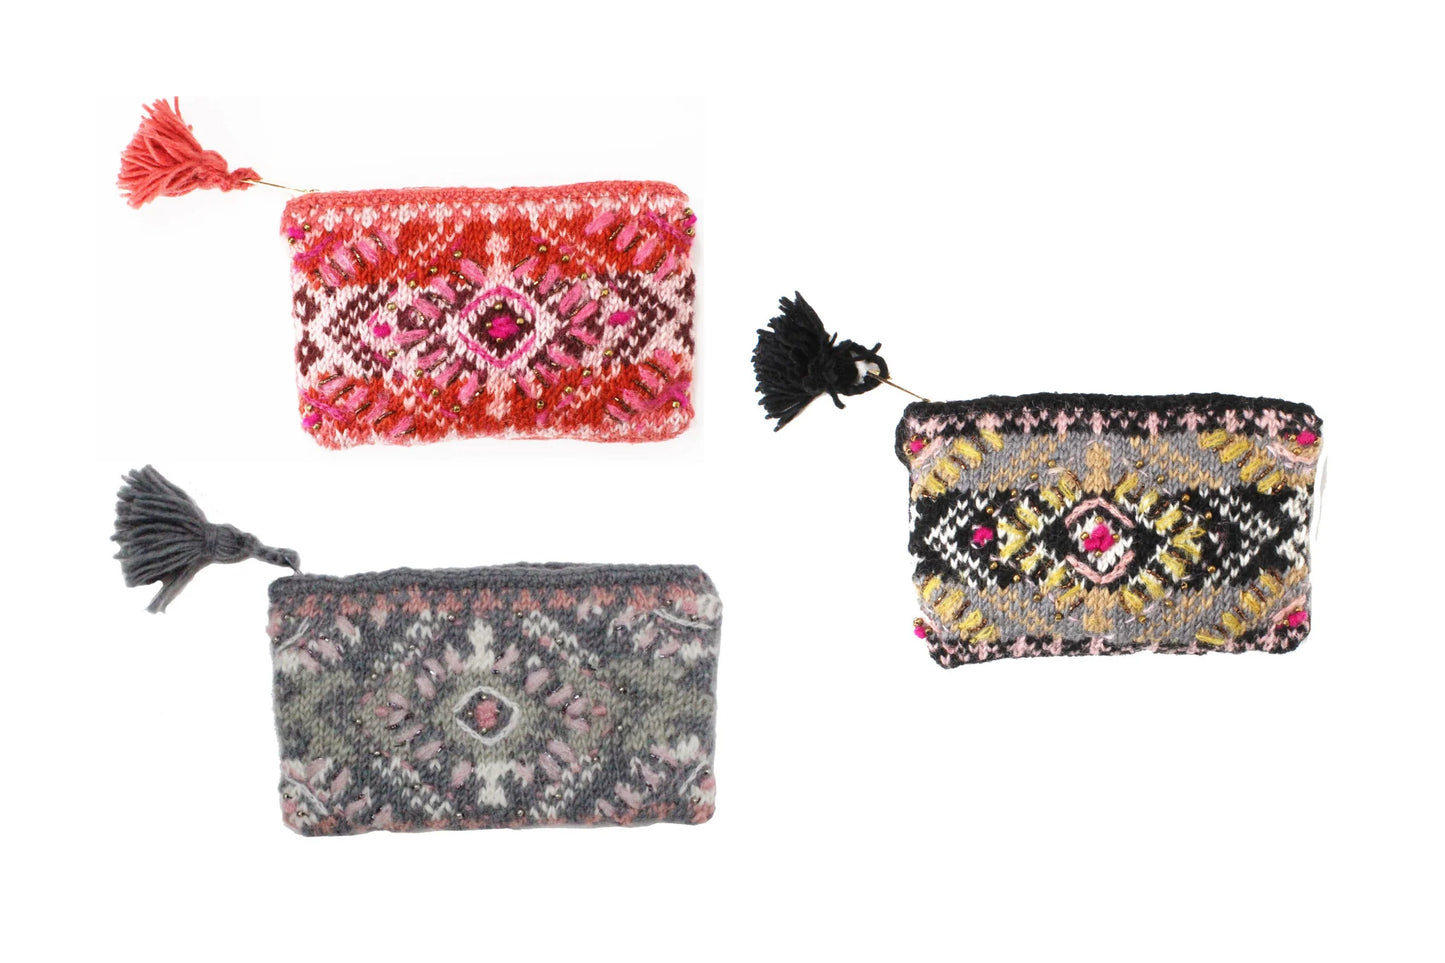 French Knot Clutches and Pouches